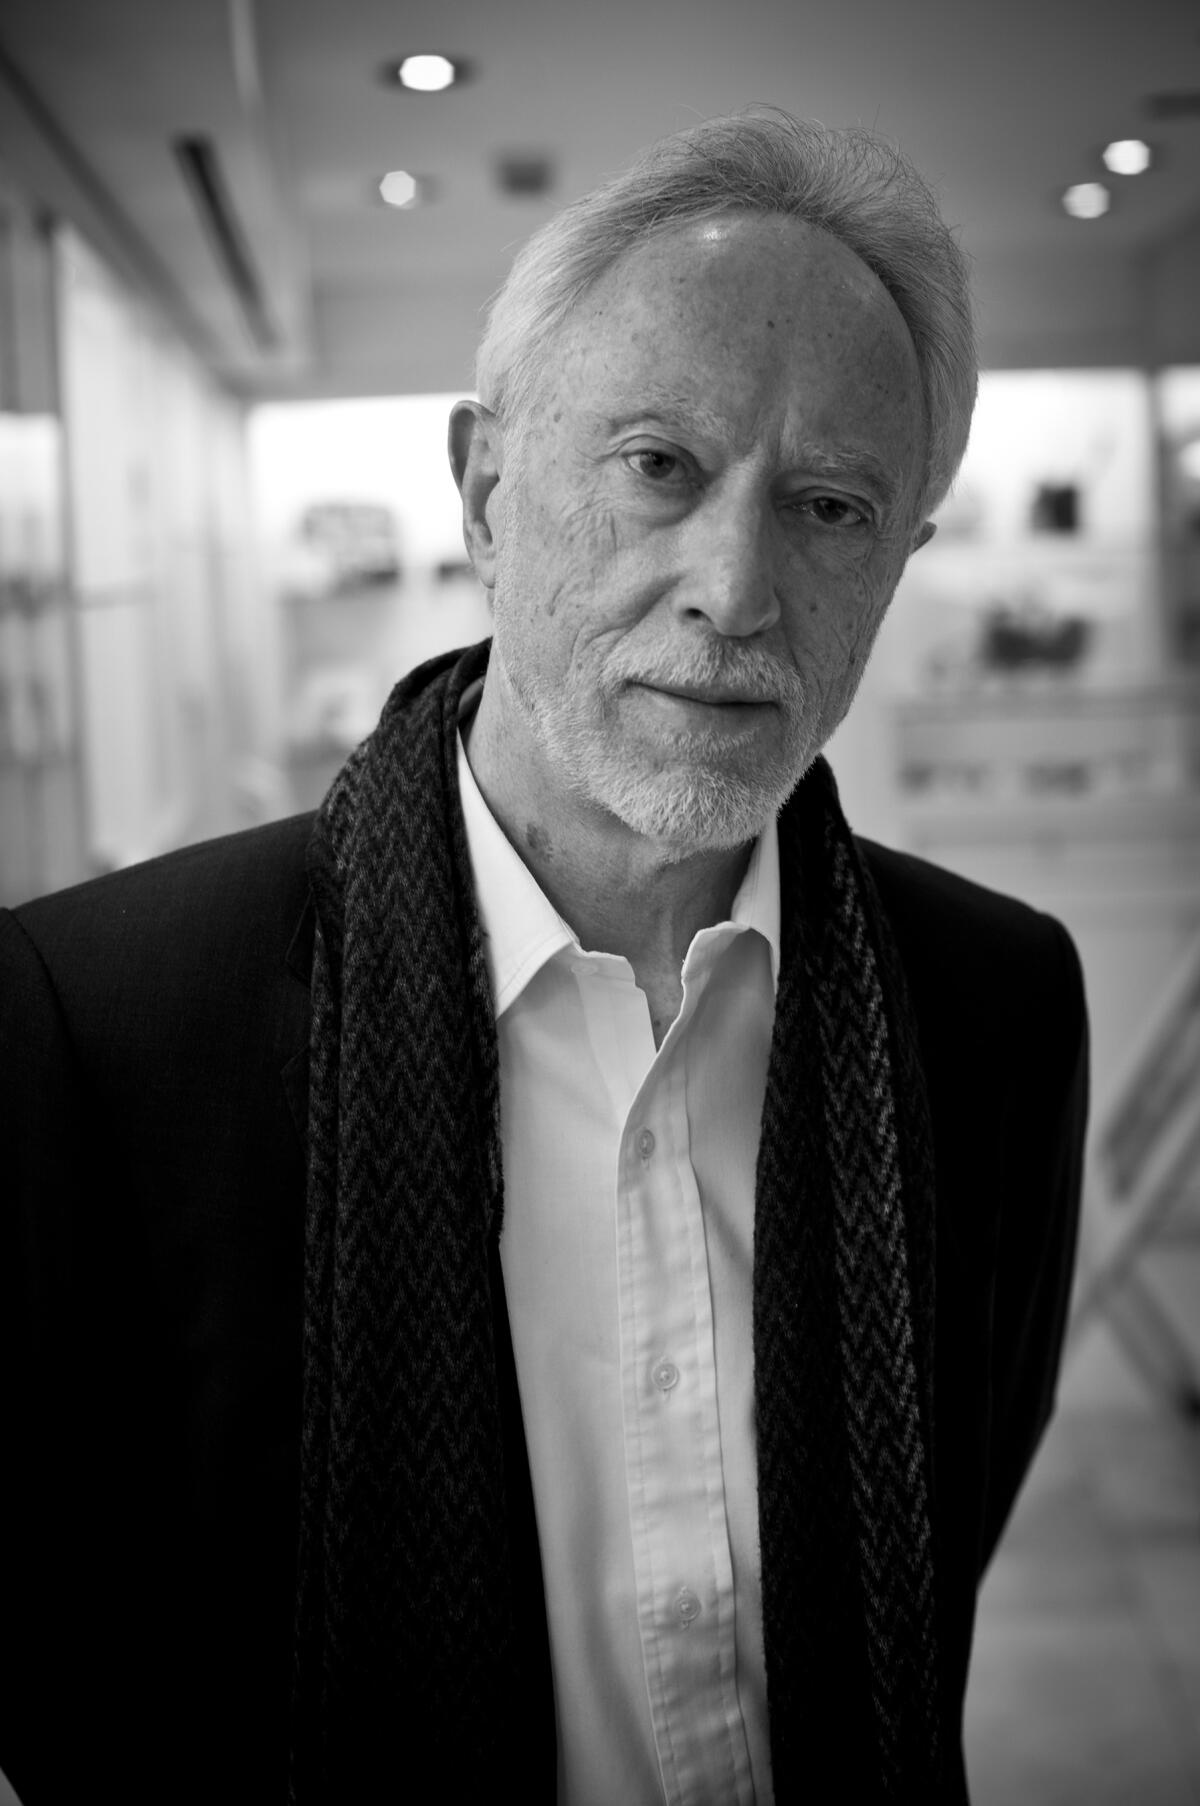 An older man standing in a dark jacket and white dress shirt in black and white.